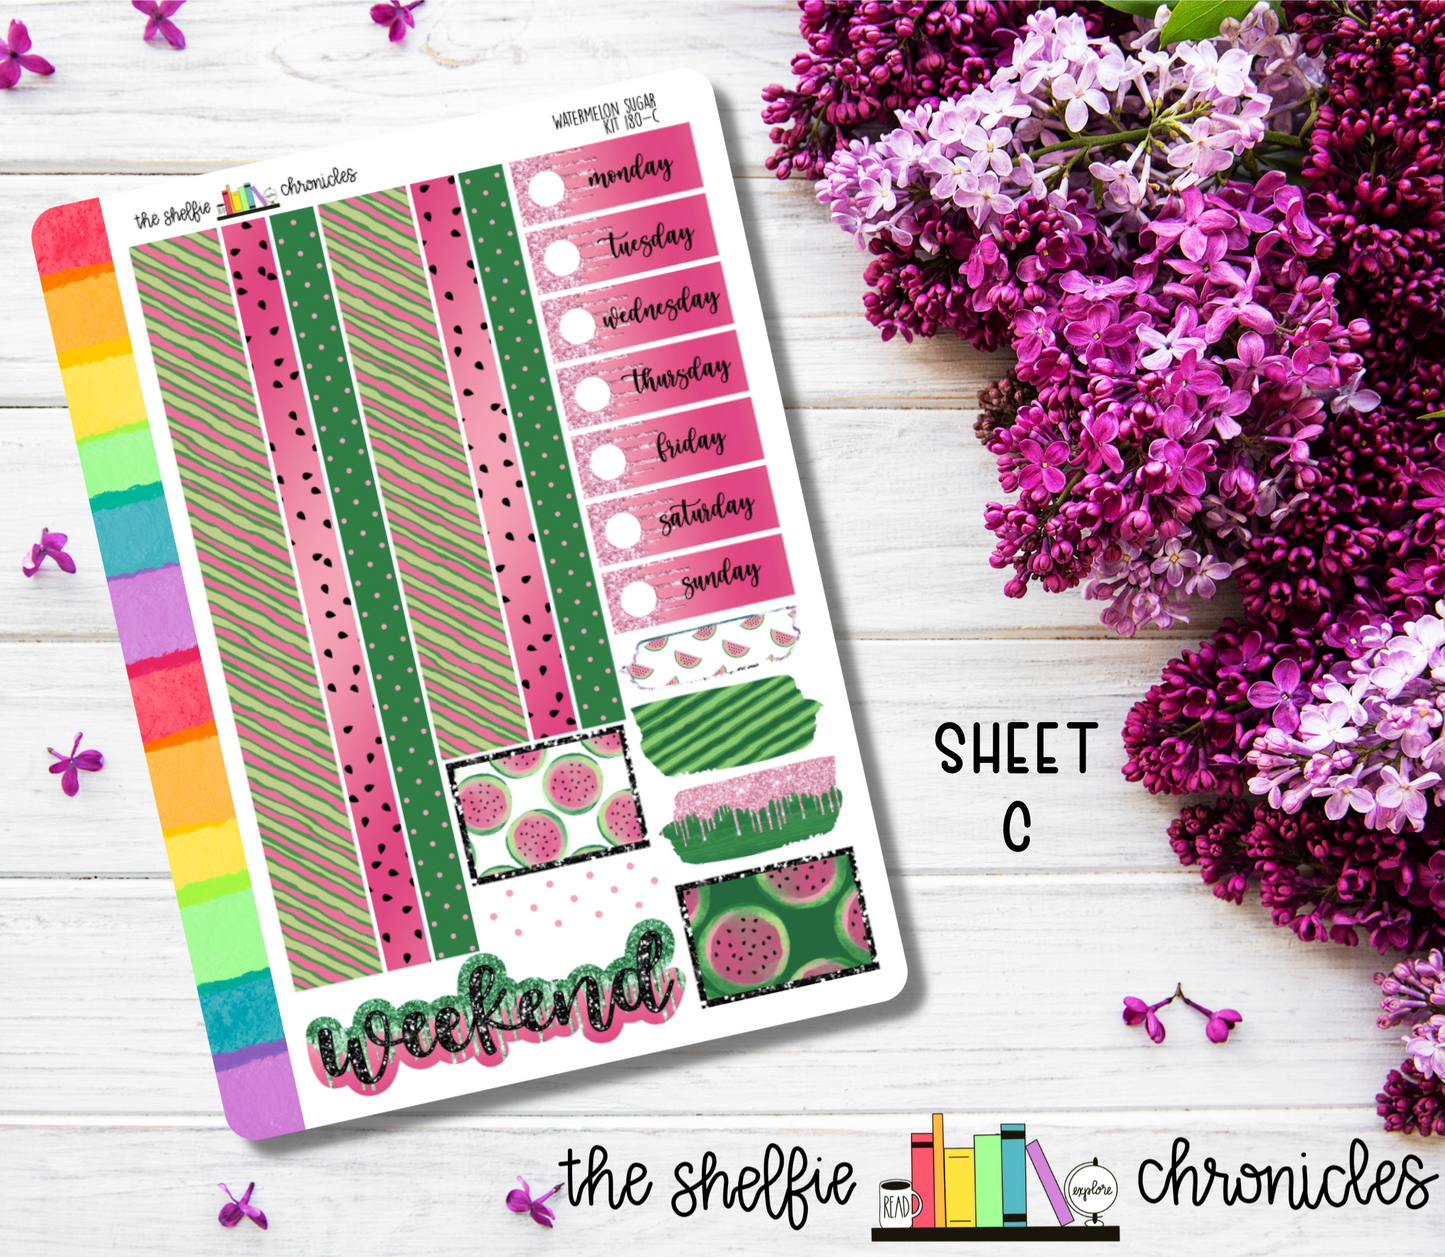 Kit 180 - Watermelon Sugar Weekly Kit - Die Cut Stickers - Repositionable Paper - Made To Fit 7x9 Planners